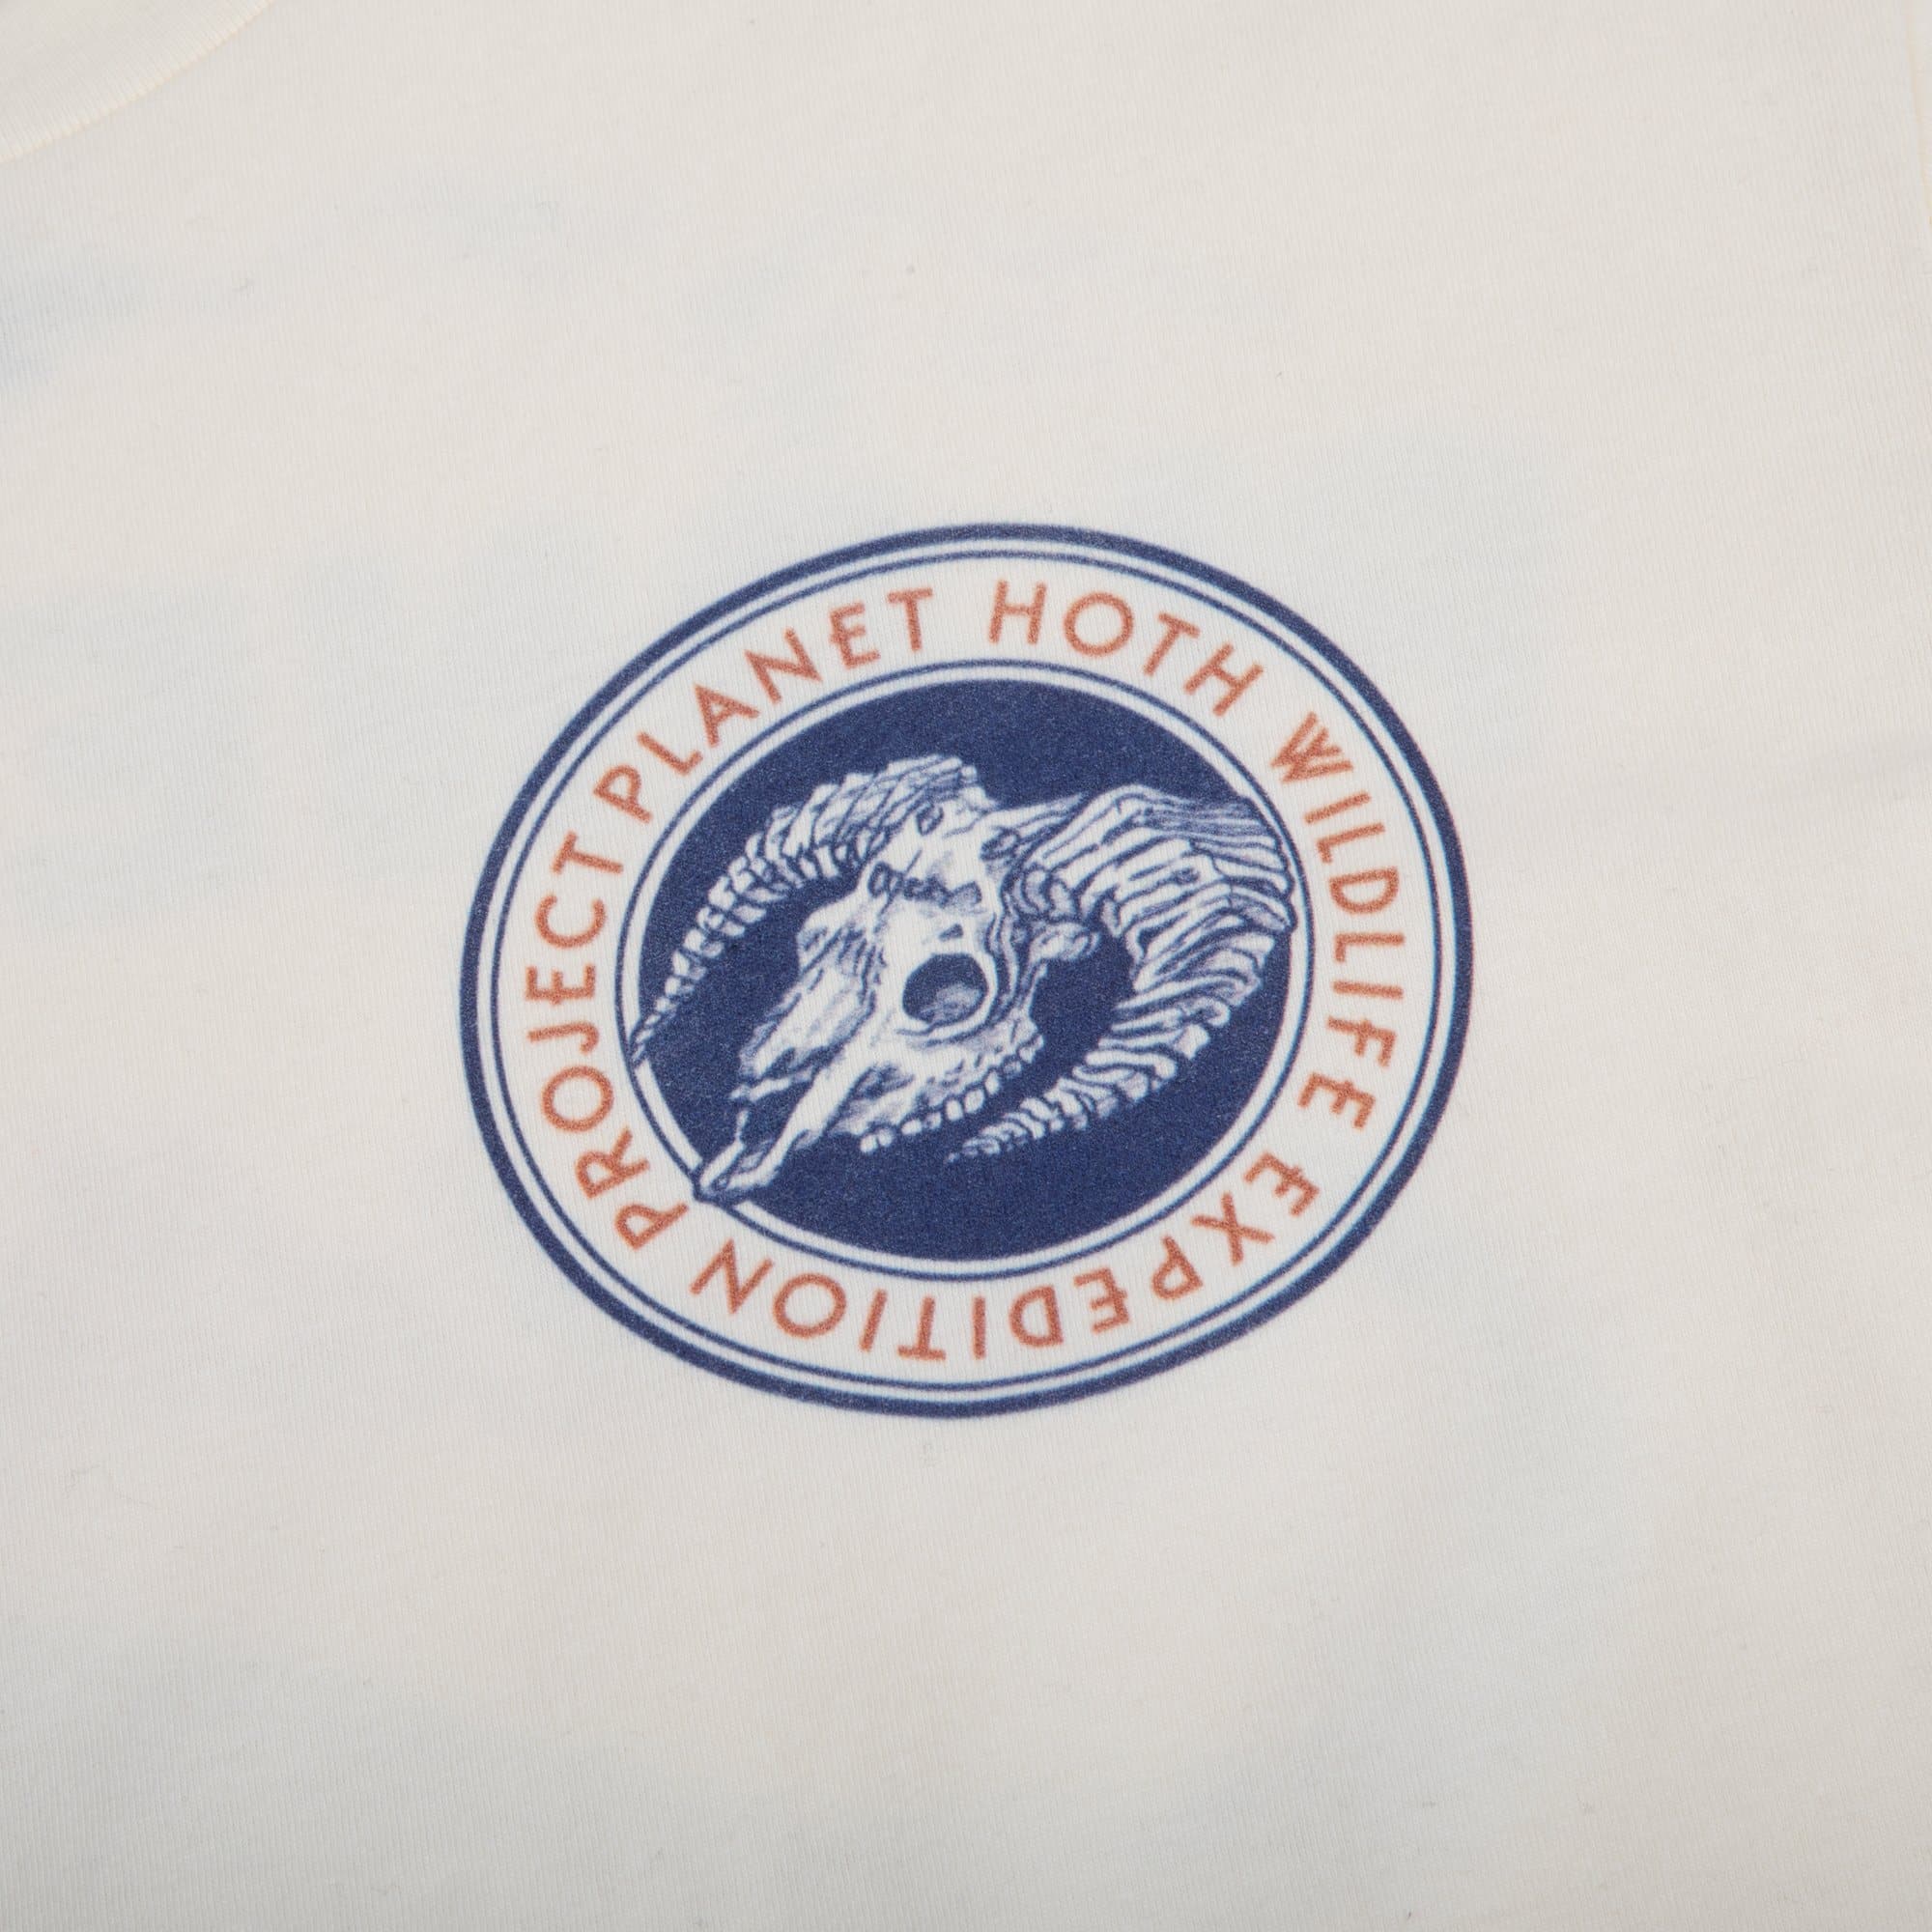 Planet Hoth Expeditions Natural Tee